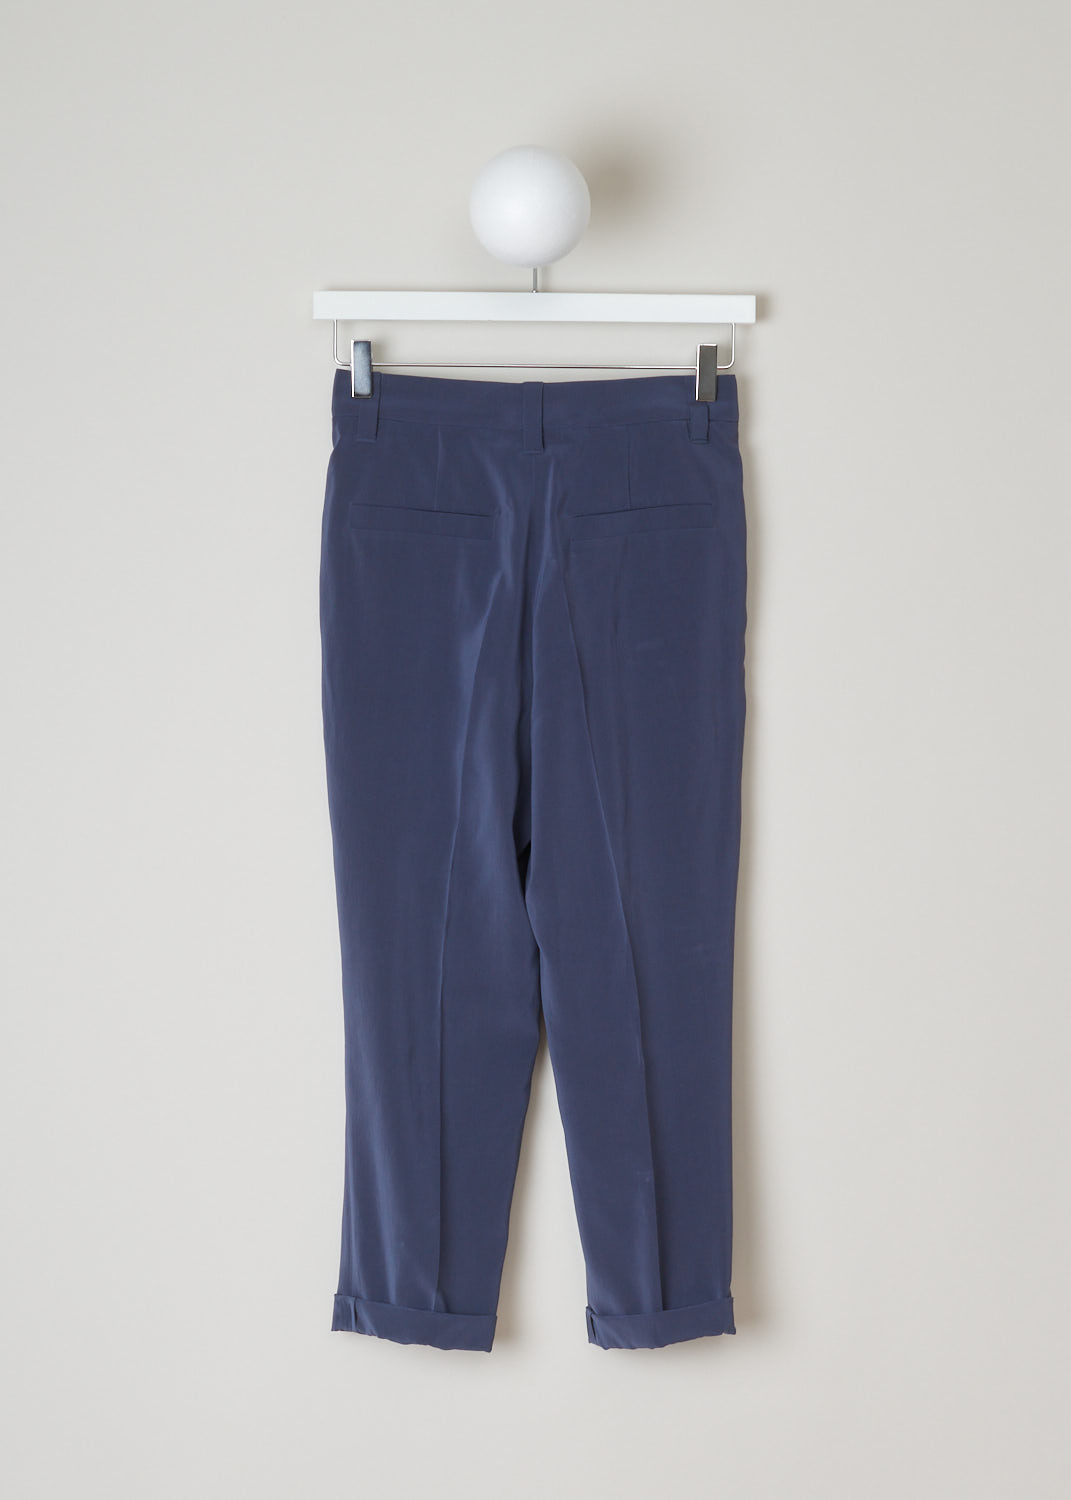 Brunello Cucinelli, Blue silk pants, M0F51P1362_C2435, blue, back, Blue pants with a slight shine to it. Featuring a single pleat and forward slanted pockets. As your closure option this model has a zipper with a metal hook and a backing button. The cropped length with the rolled up hems just adds style to these pants. On the backside you will find two welt pockets.